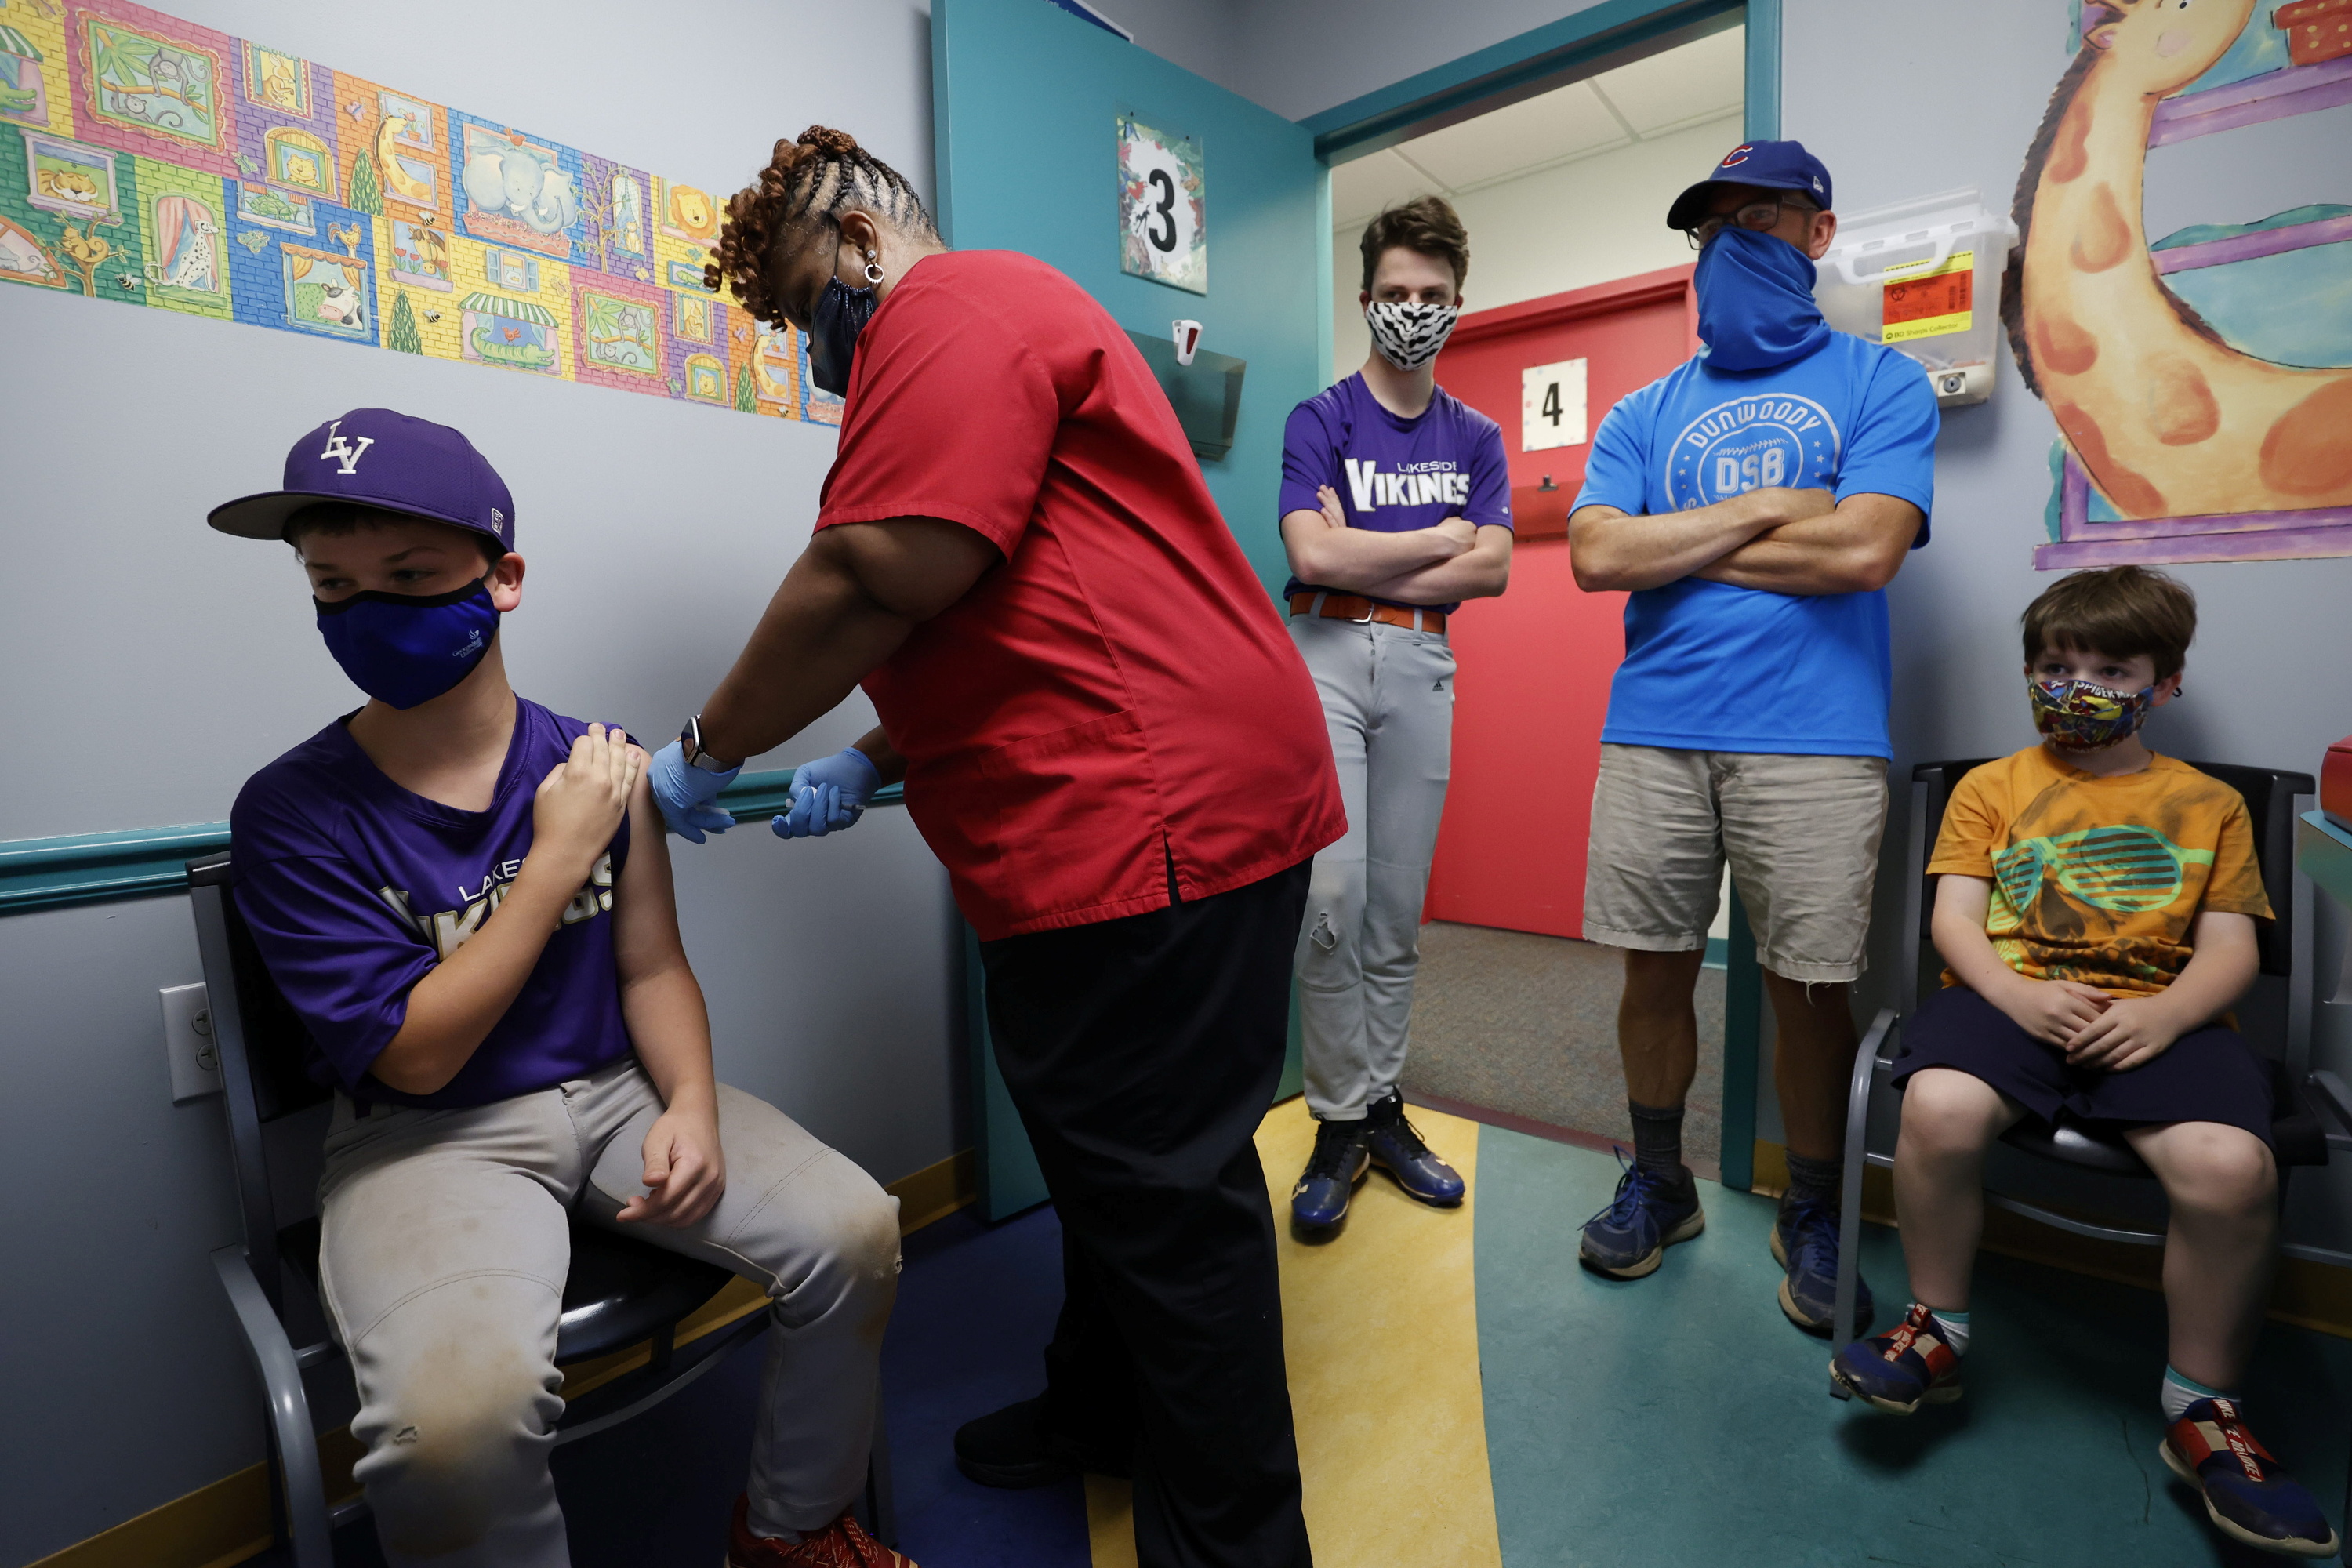 Family members look on as Jack Frilingos, 12, is inoculated with Pfizer's vaccine against coronavirus disease (COVID-19) after Georgia authorized the vaccine for ages over 12 years, at Dekalb Pediatric Center in Decatur